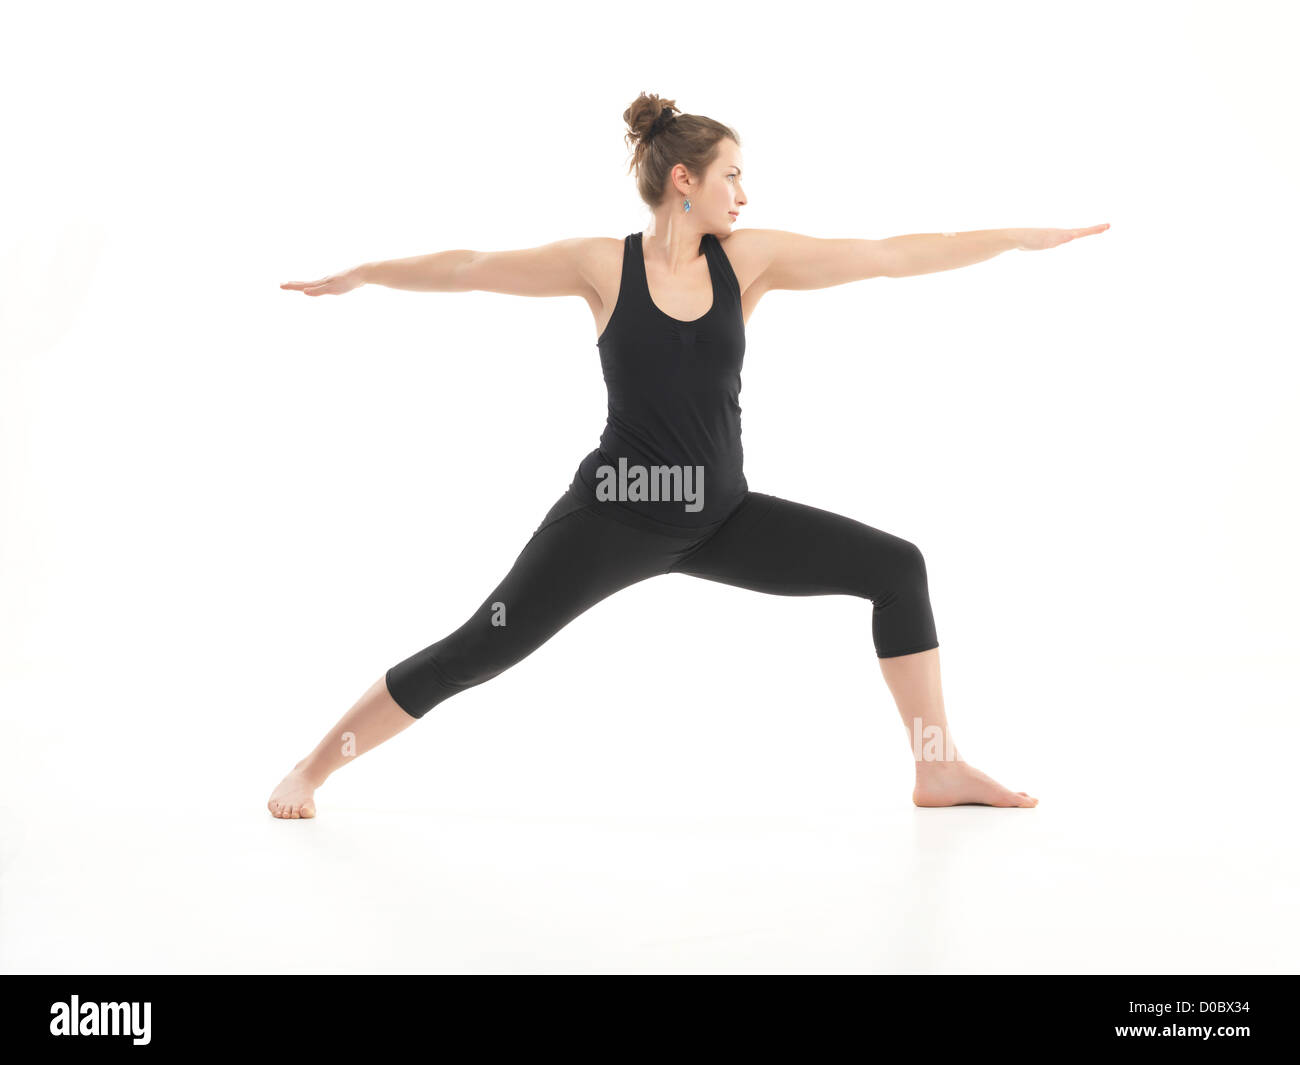 single young, woman in yoga pose, dressed in black on white background  Stock Photo